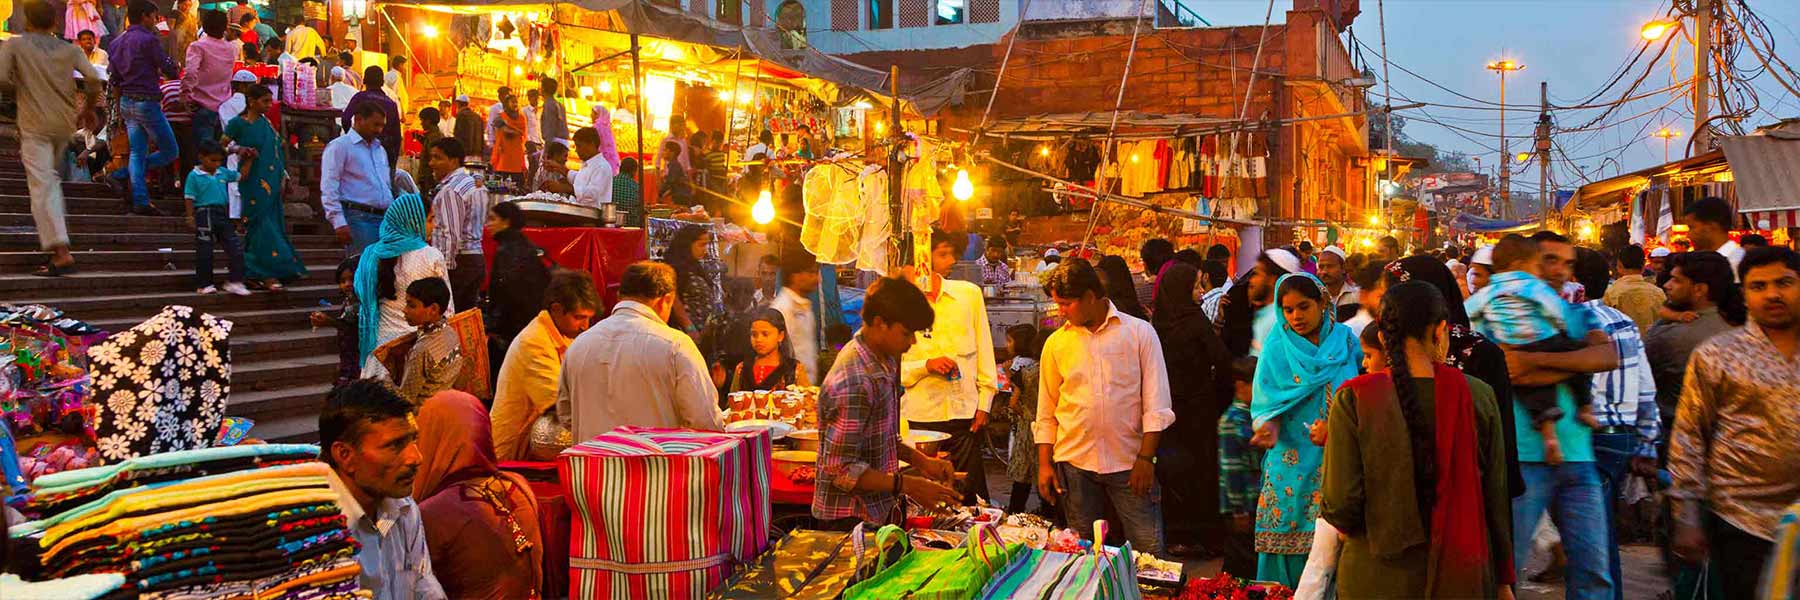 Shoppers browse at an outdoor market at dusk.